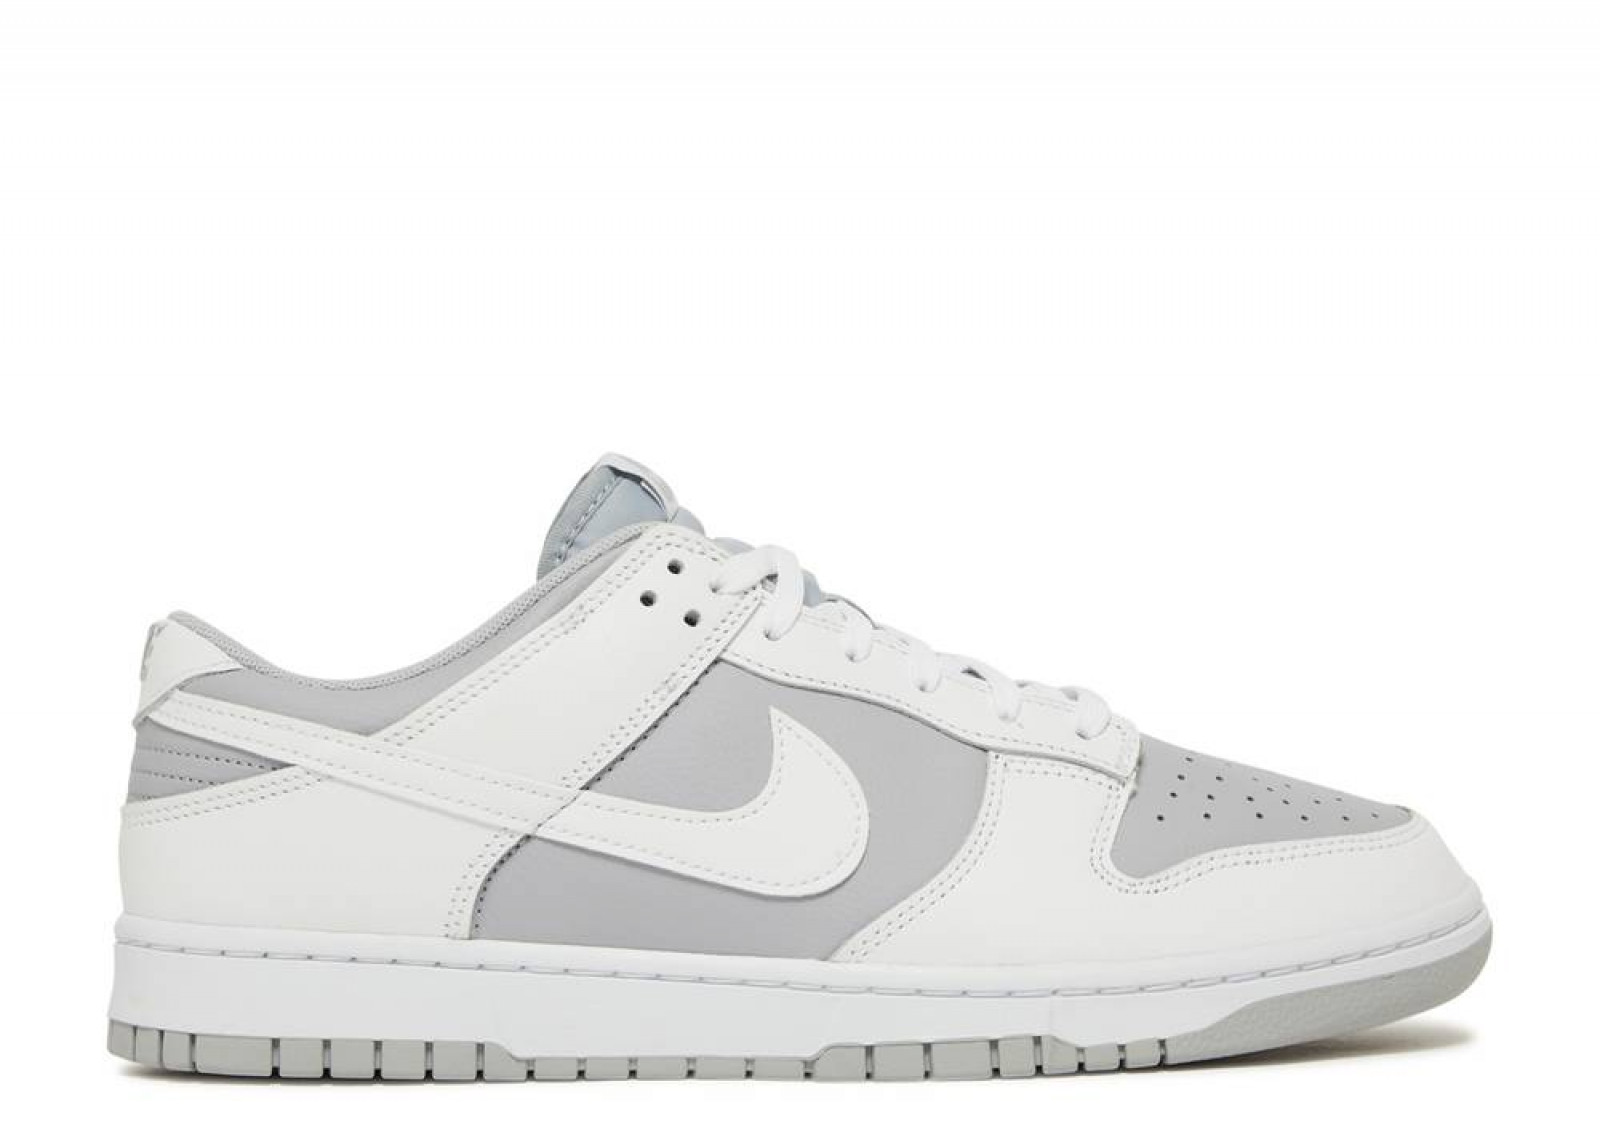 DUNK LOW WHITE NEUTRAL GREY image 1